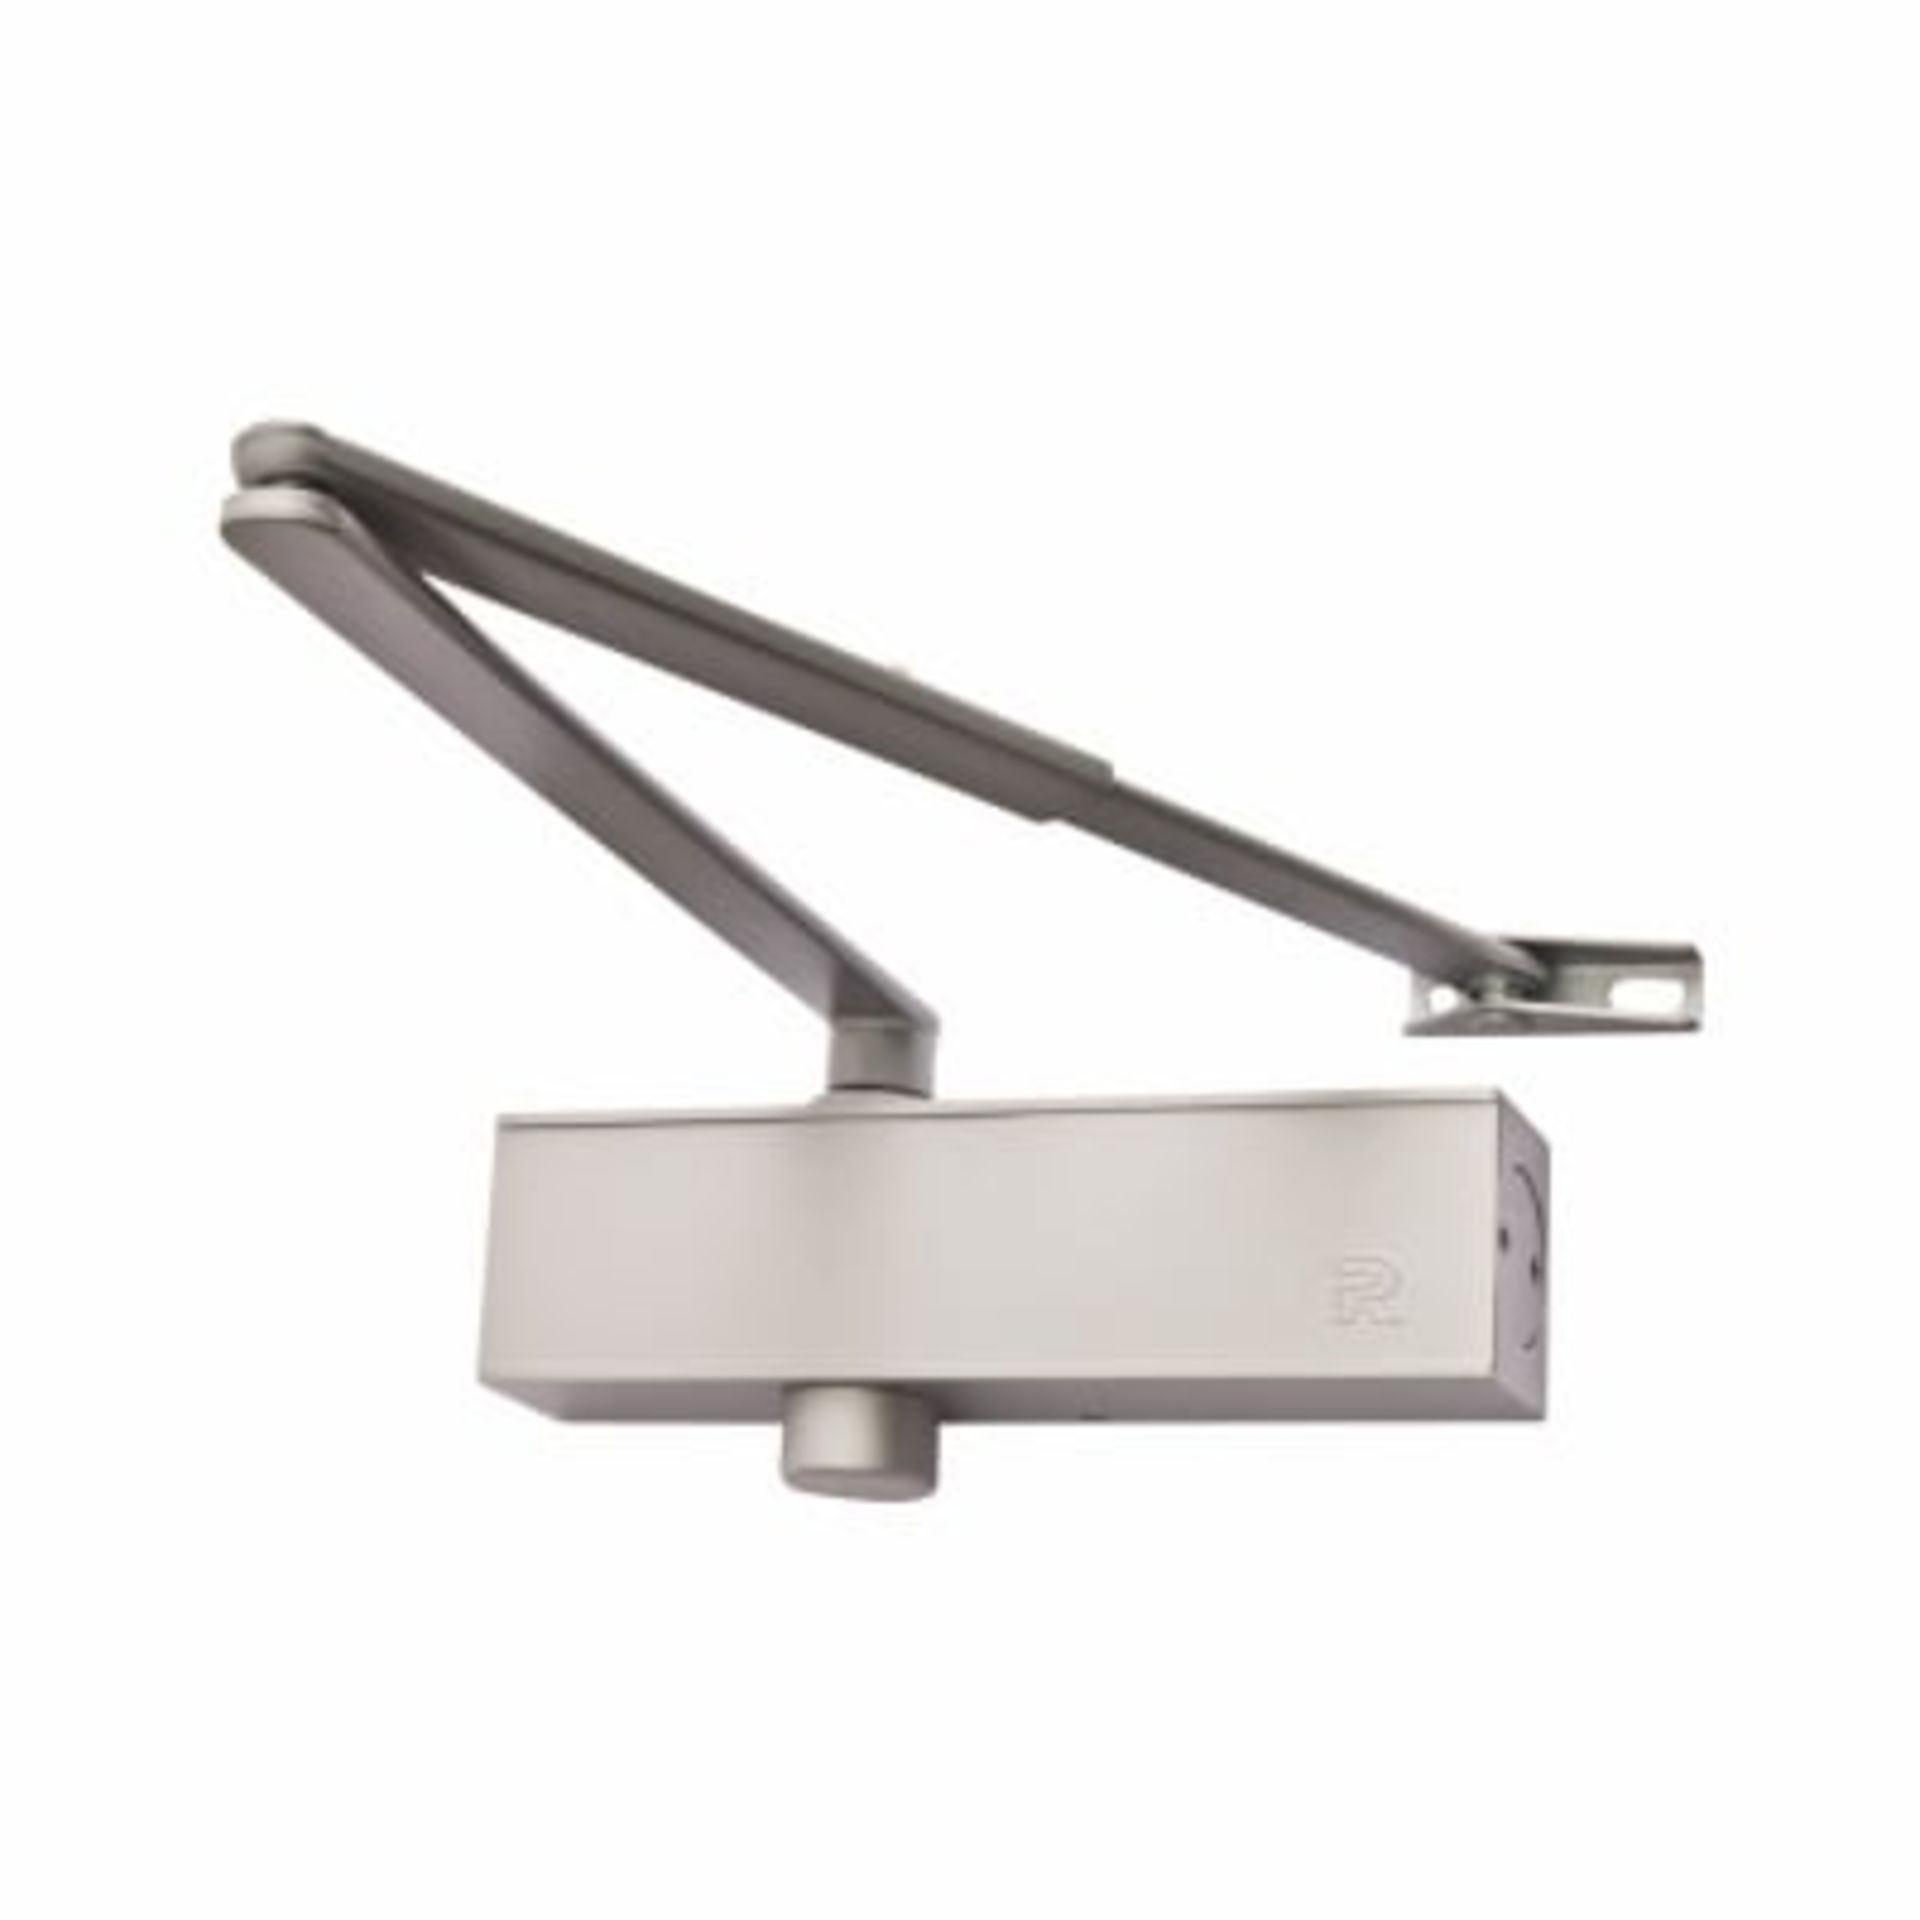 1 x Rutland Soft Door Closer in Polished Nickle Plate - Size 2/4 - Brand New Stock - Product Code